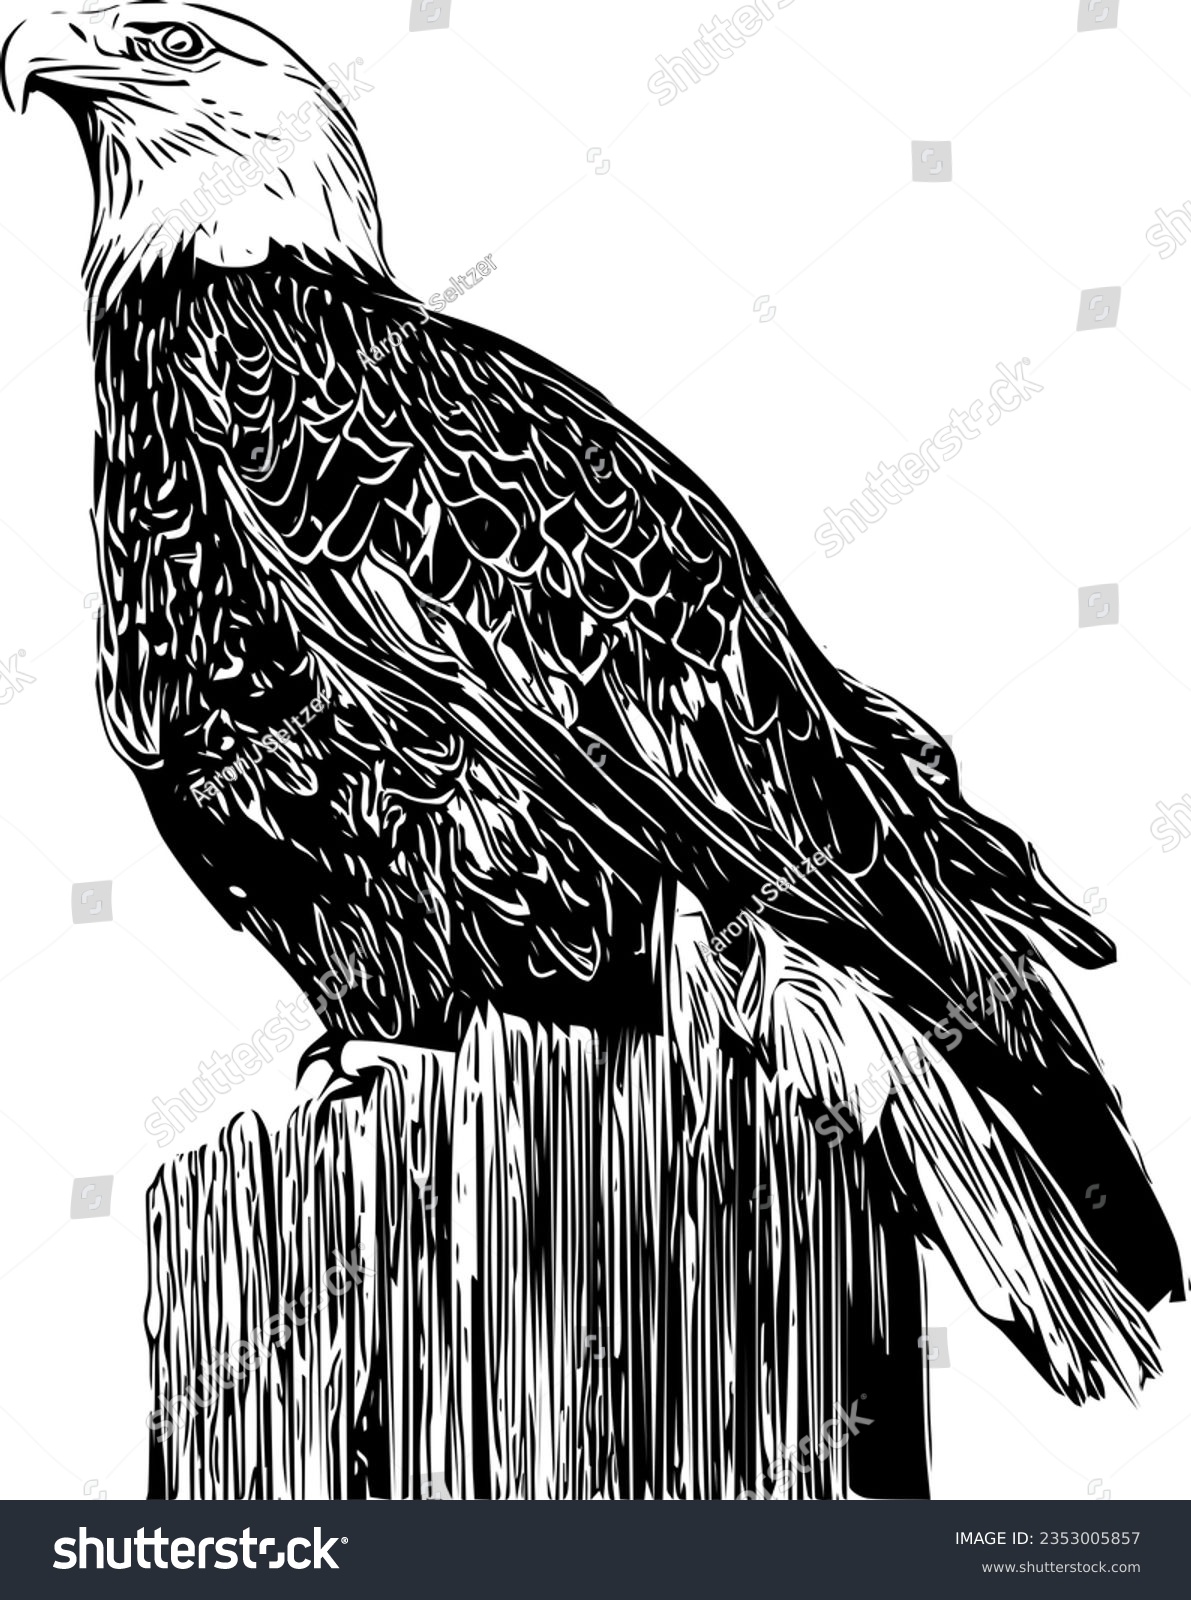 SVG of Realistic drawing of a Bald Eagle svg